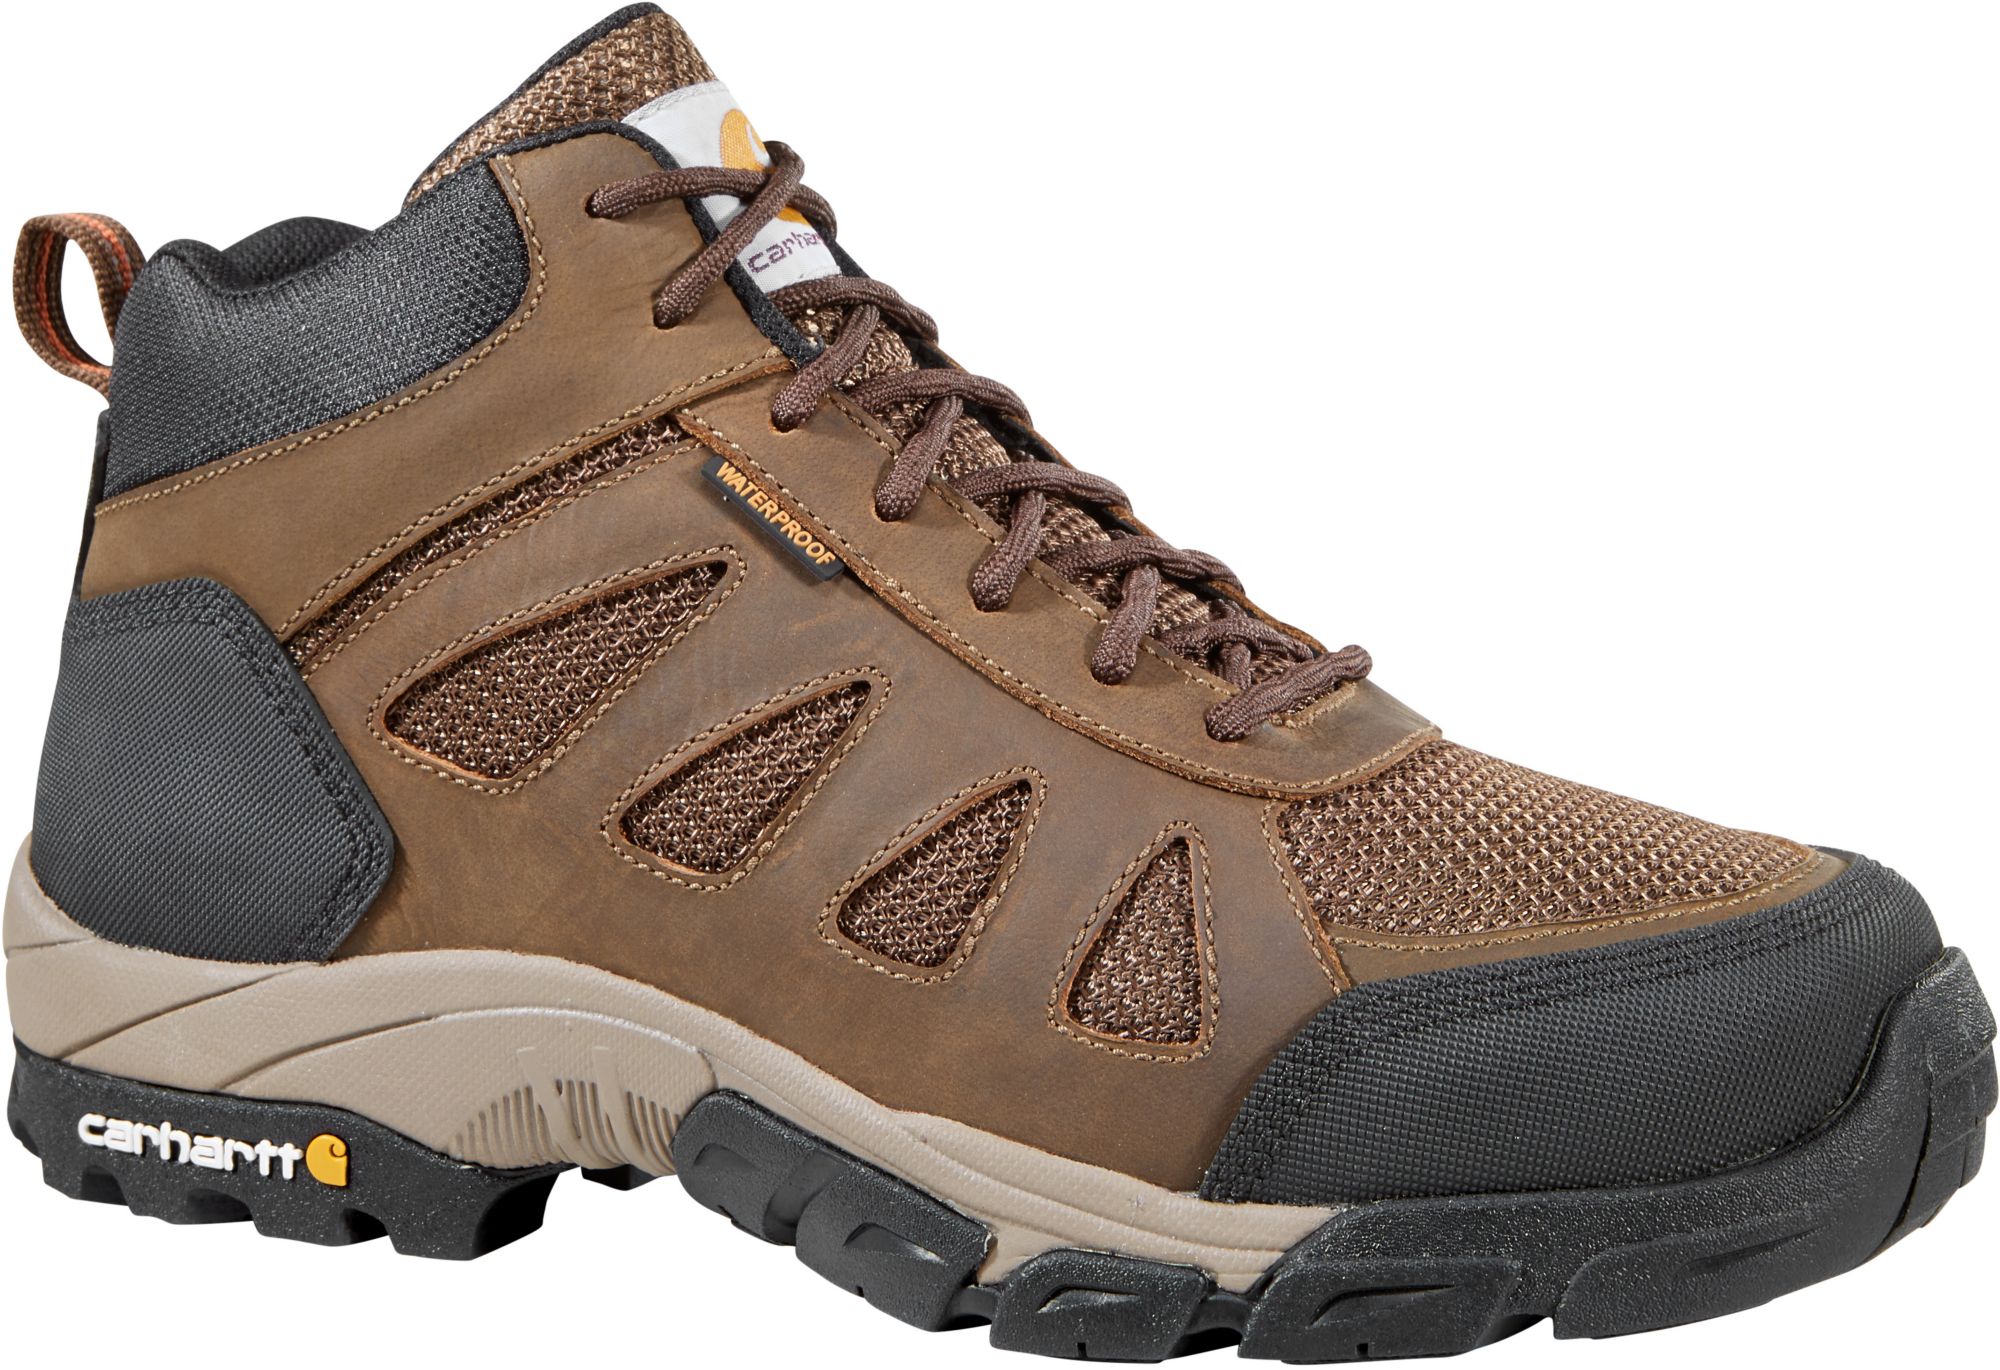 lightweight safety toe boots